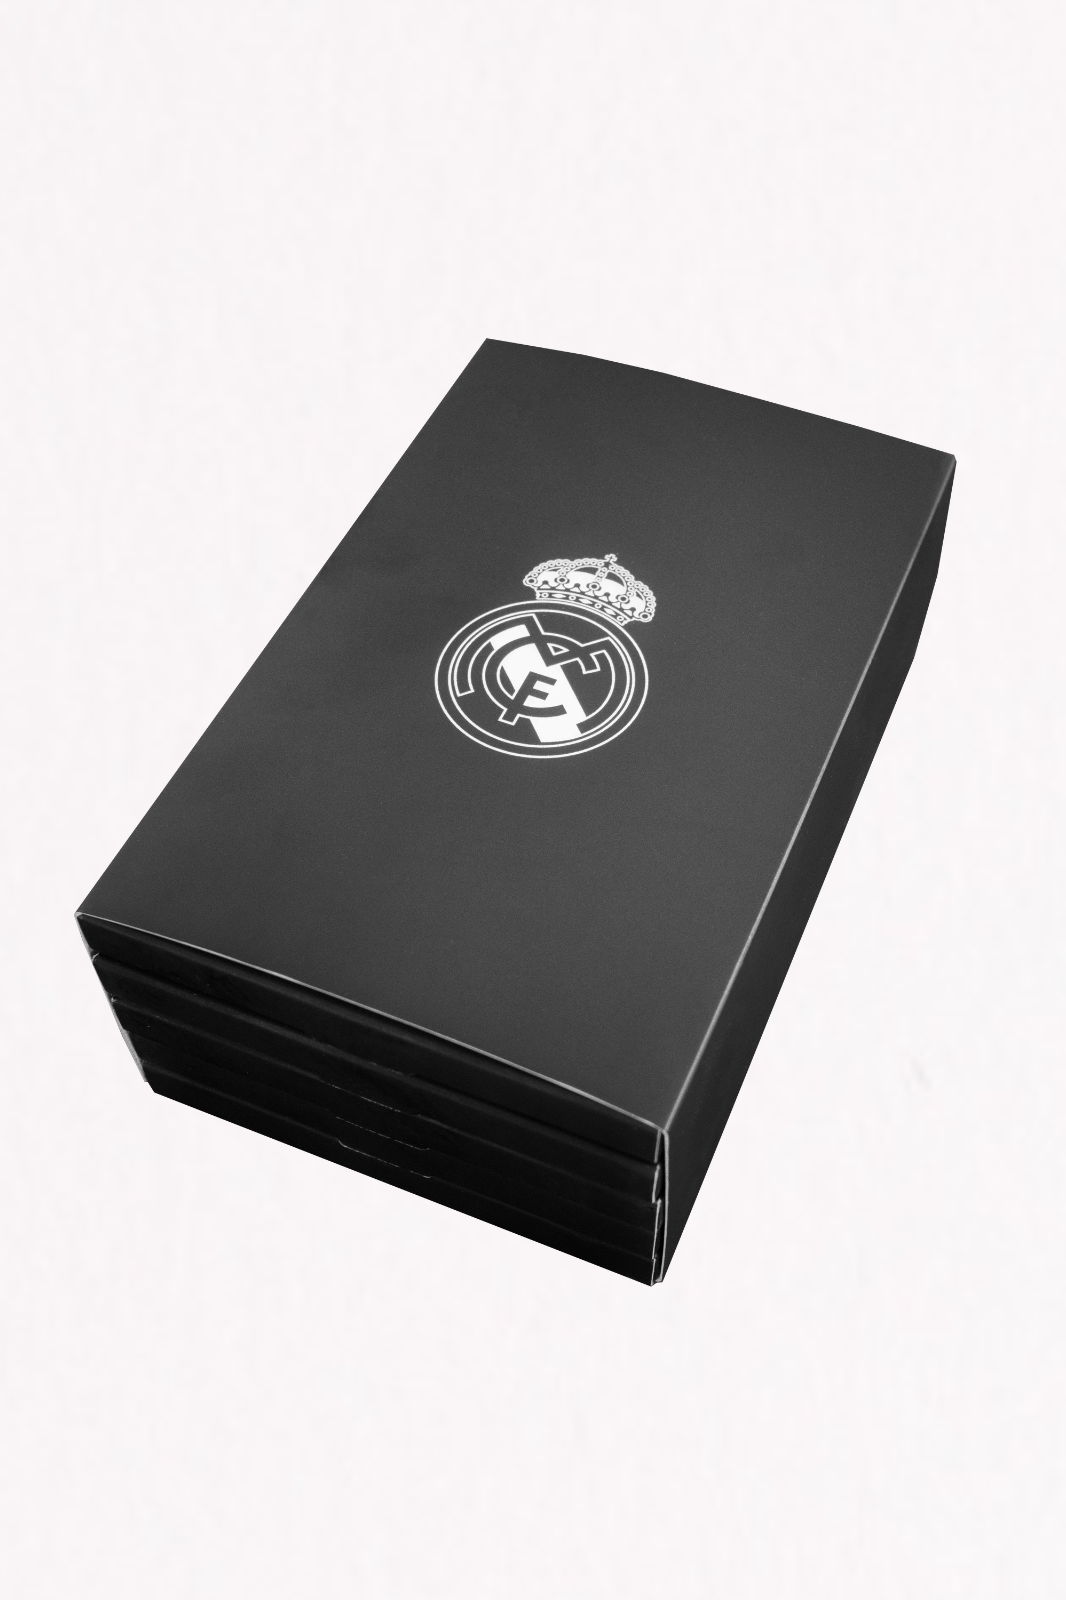 Real Madrid - Pack Misterioso de 5 Icons 100 ejemplares